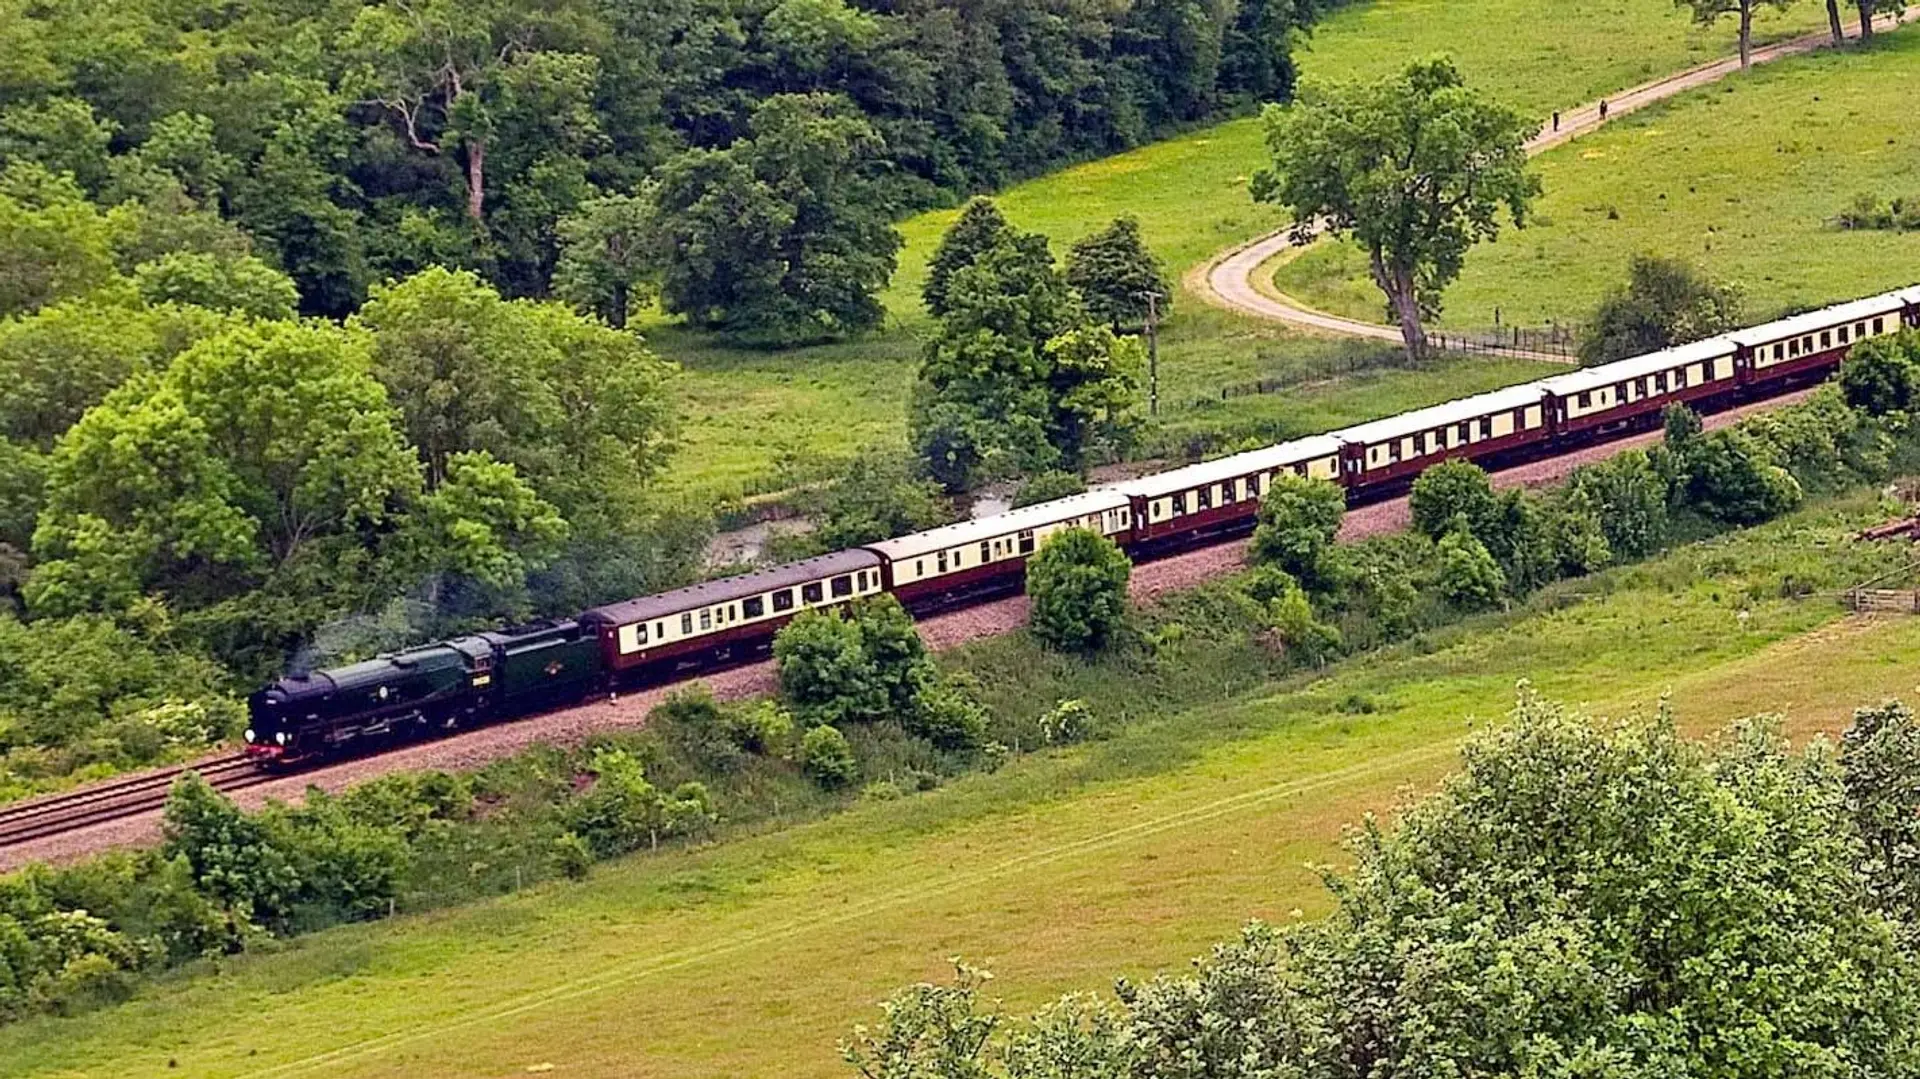 Trains Reviews - Belmond teams up with filmmaker Wes Anderson on its British Pullman train service